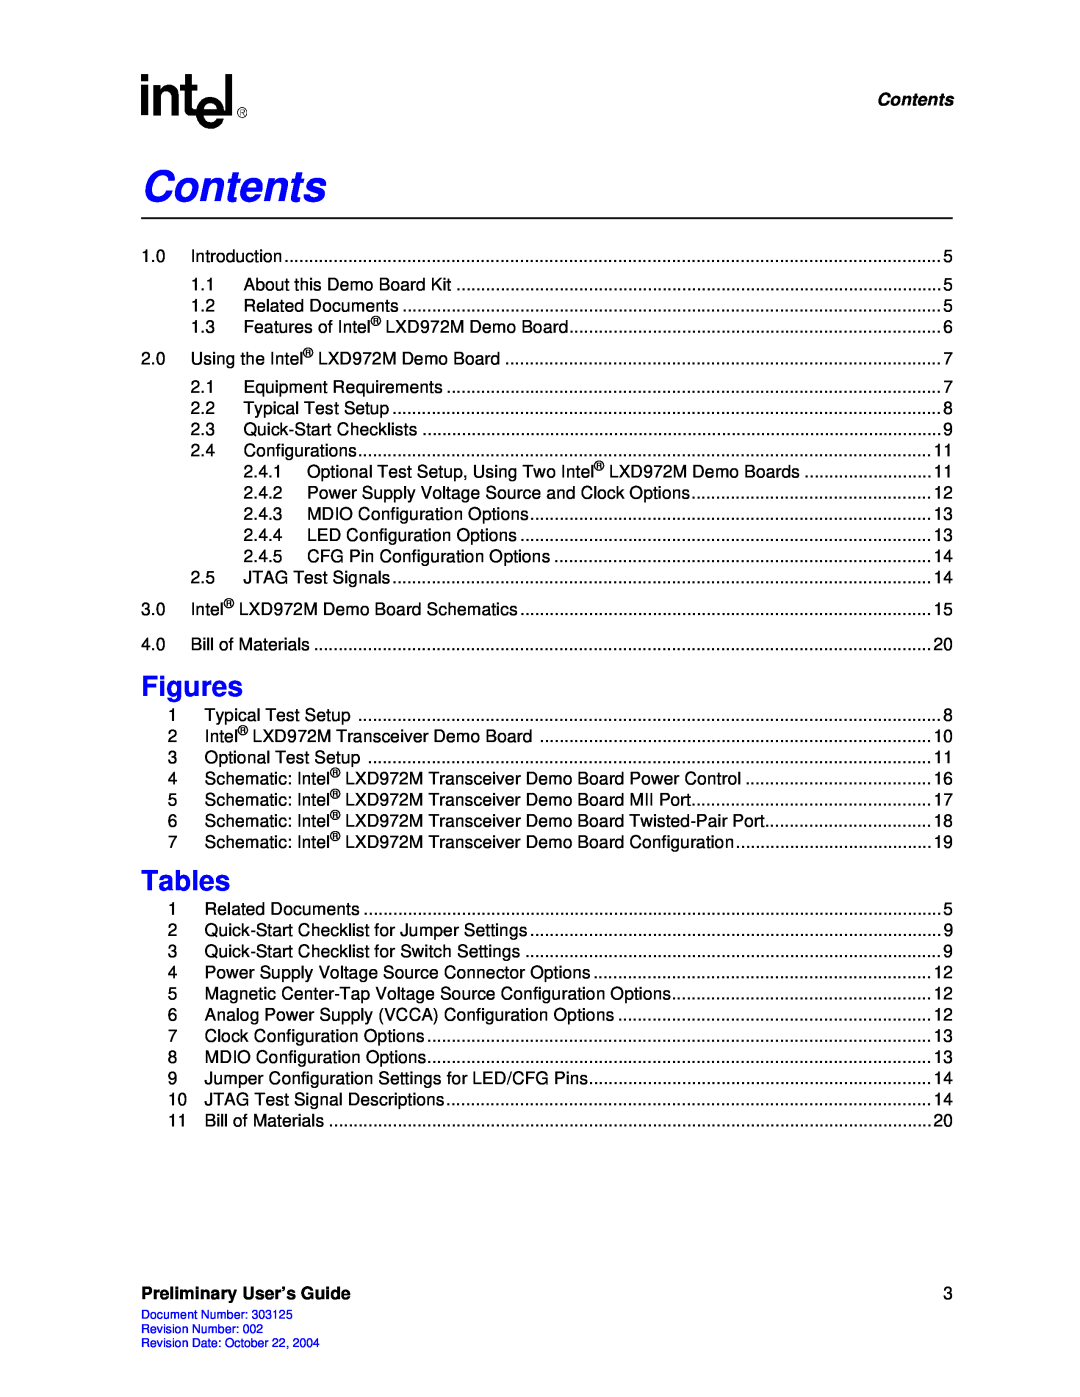 Intel LXD972M manual Figures, Tables, Contents, Preliminary User’s Guide 